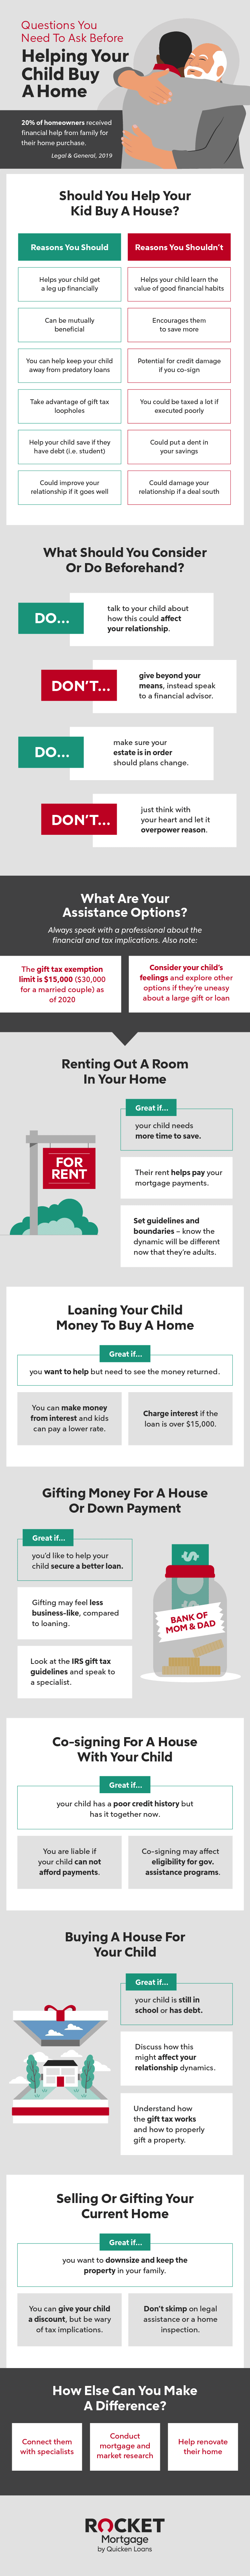 Large infographic detailing questions and additional factors in whether or not to help one's child buy a home.